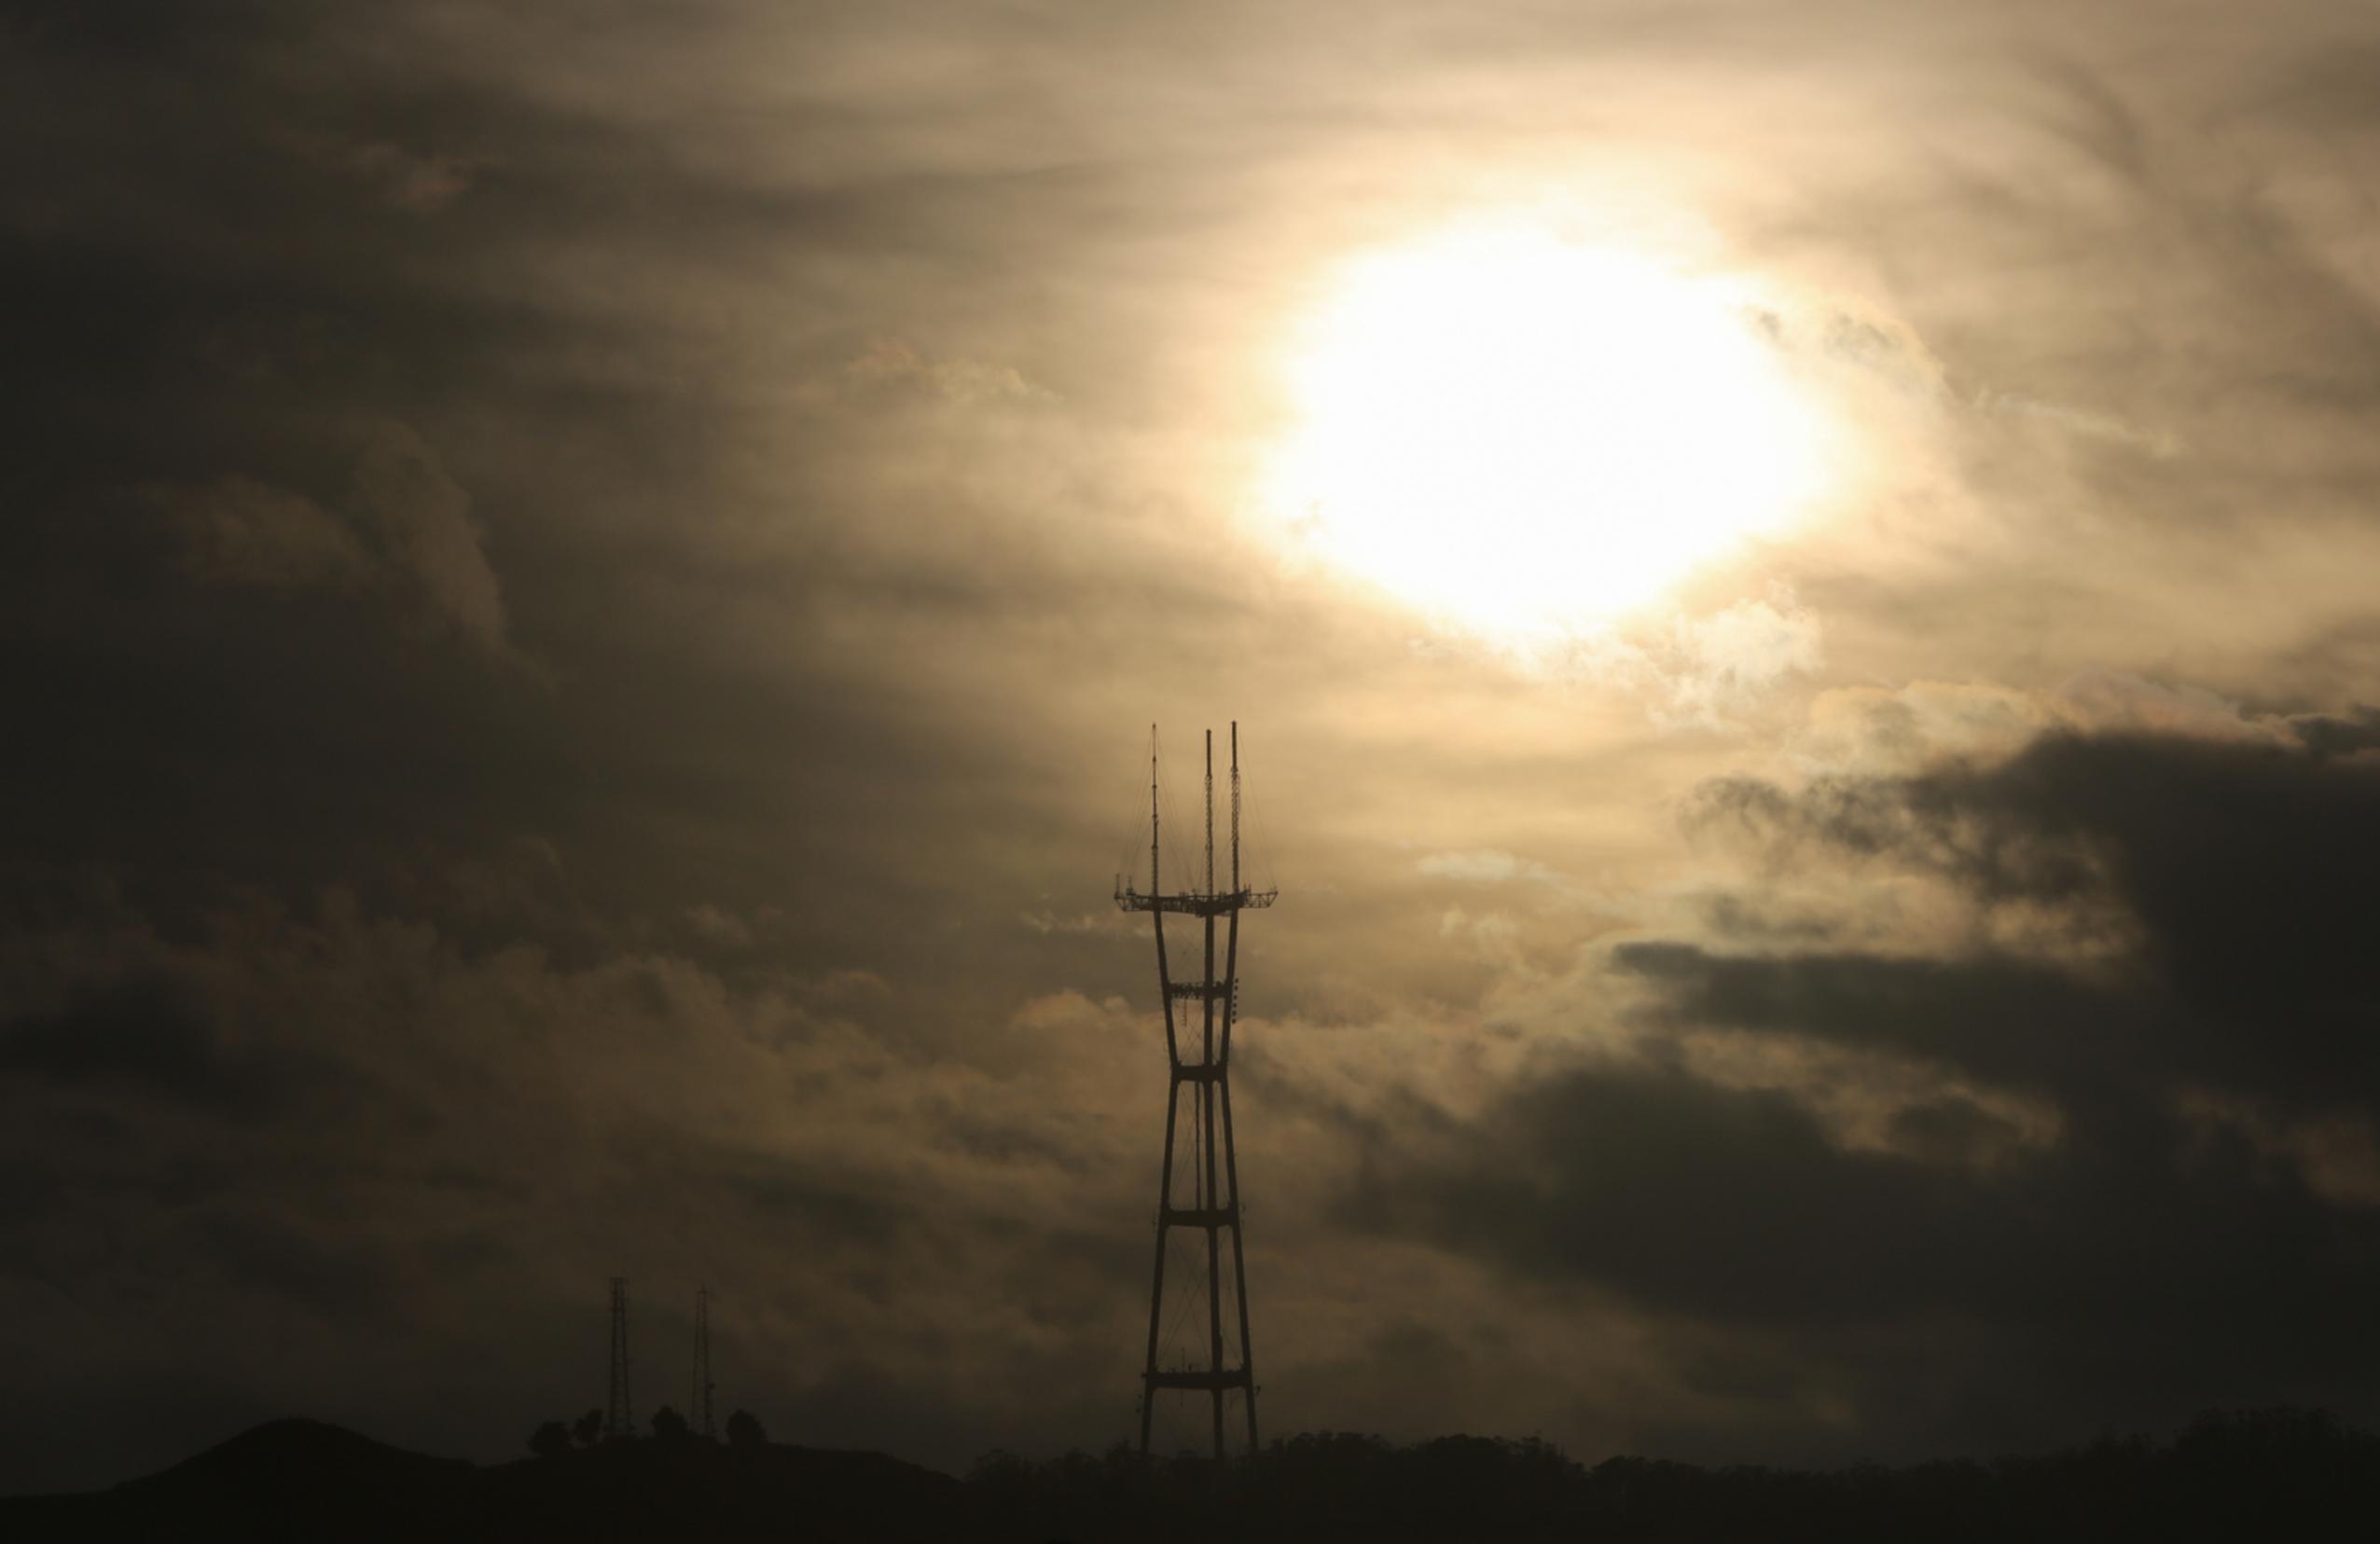 sutro tower clouds contrast summer sunset